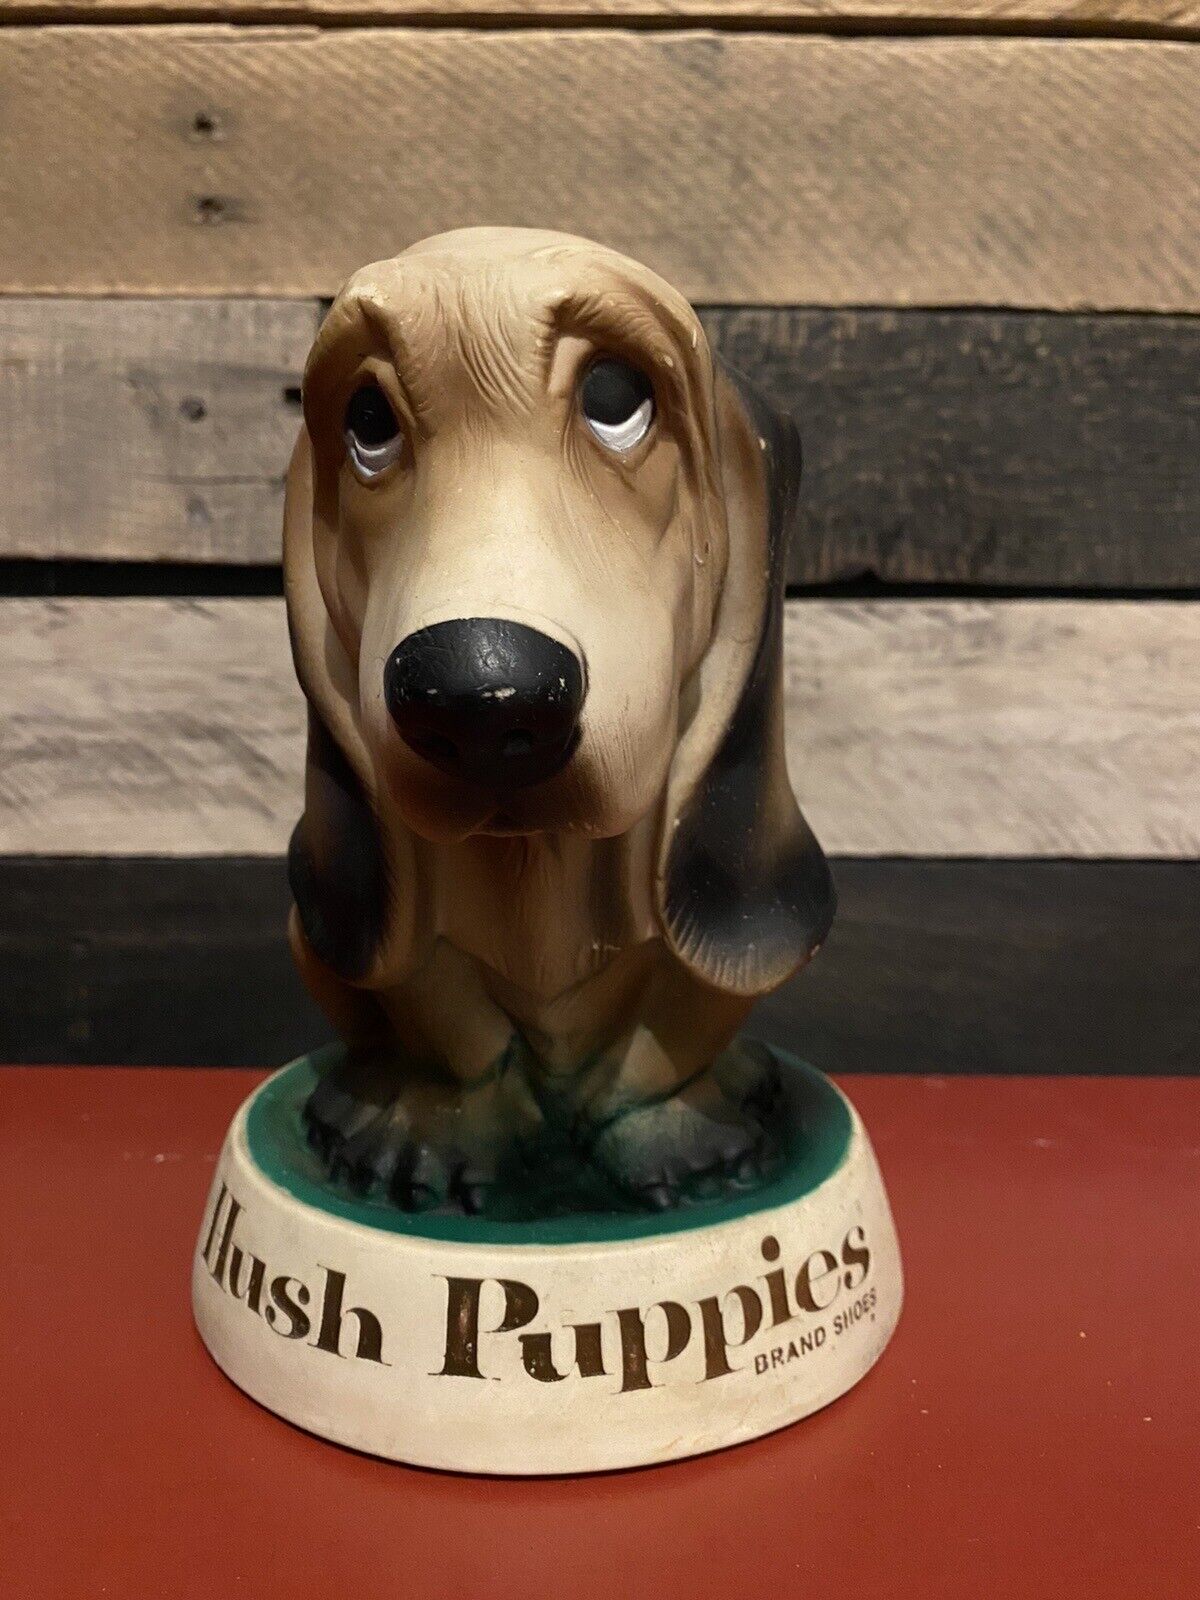 Vintage Hush Puppies Brand Shoes Basset Hound Coin Bank Advertising Piece